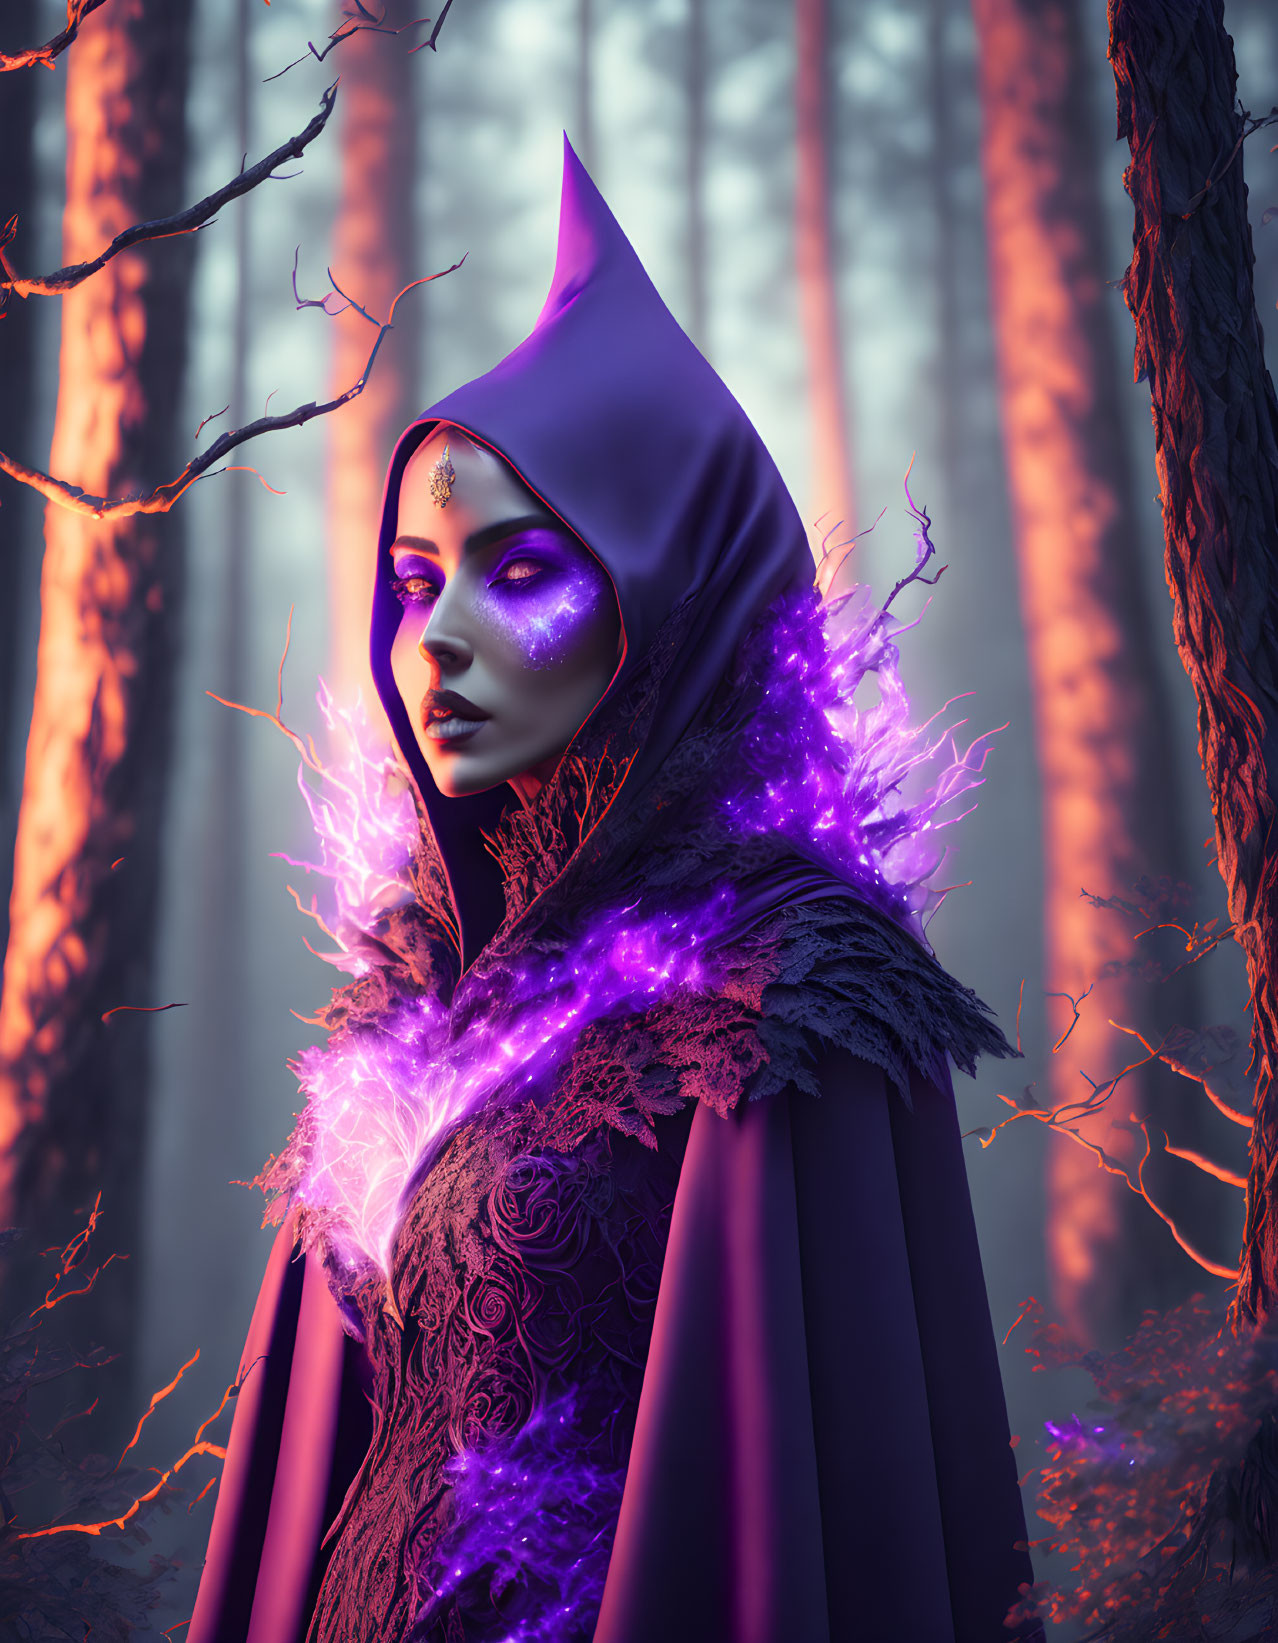 Mystical figure in purple cloak with glowing energy in twilight forest